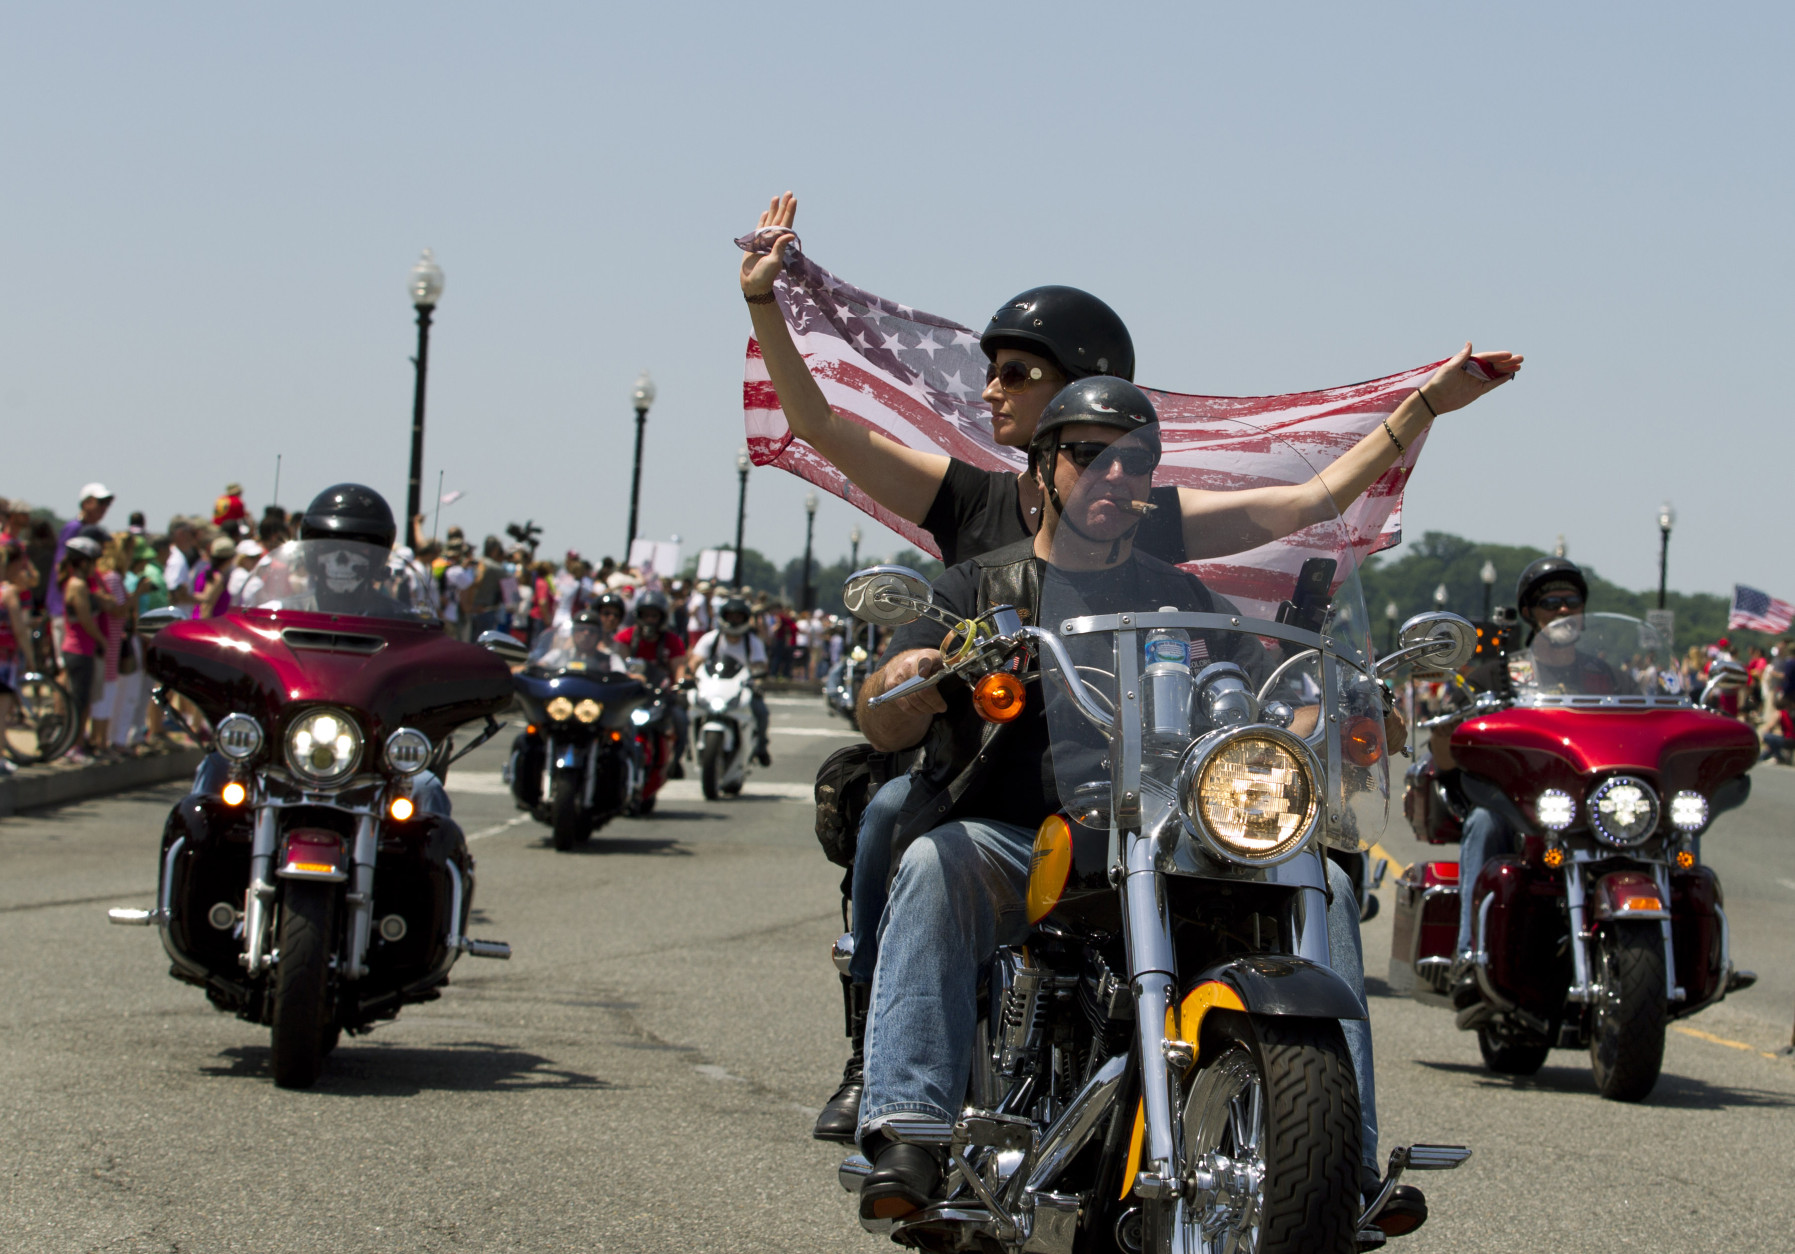 Participants in the Rolling Thunder annual motorcycle rally ride past Arlington memorial bridge during the parade ahead of Memorial Day in Washington, Sunday, May 24, 2015.  (AP Photo/Jose Luis Magana)